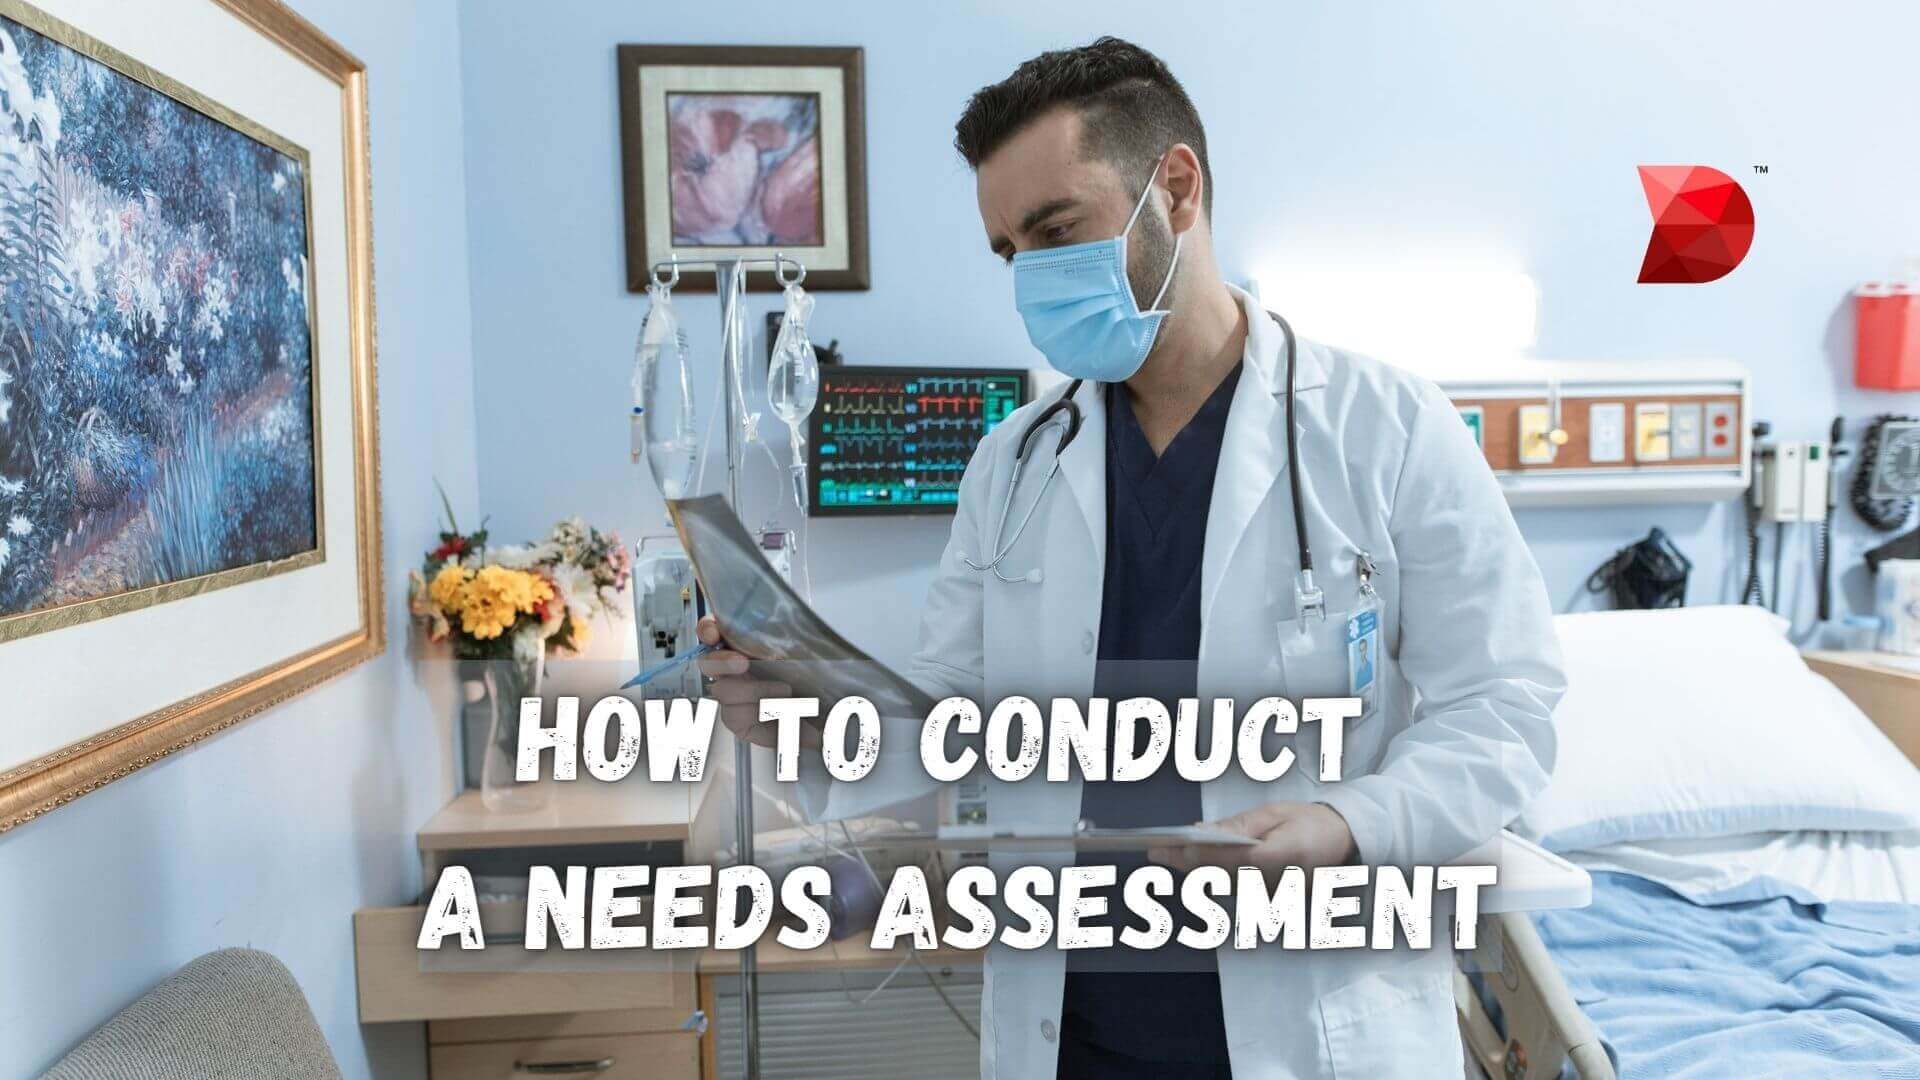 How to Conduct a Needs Assessment